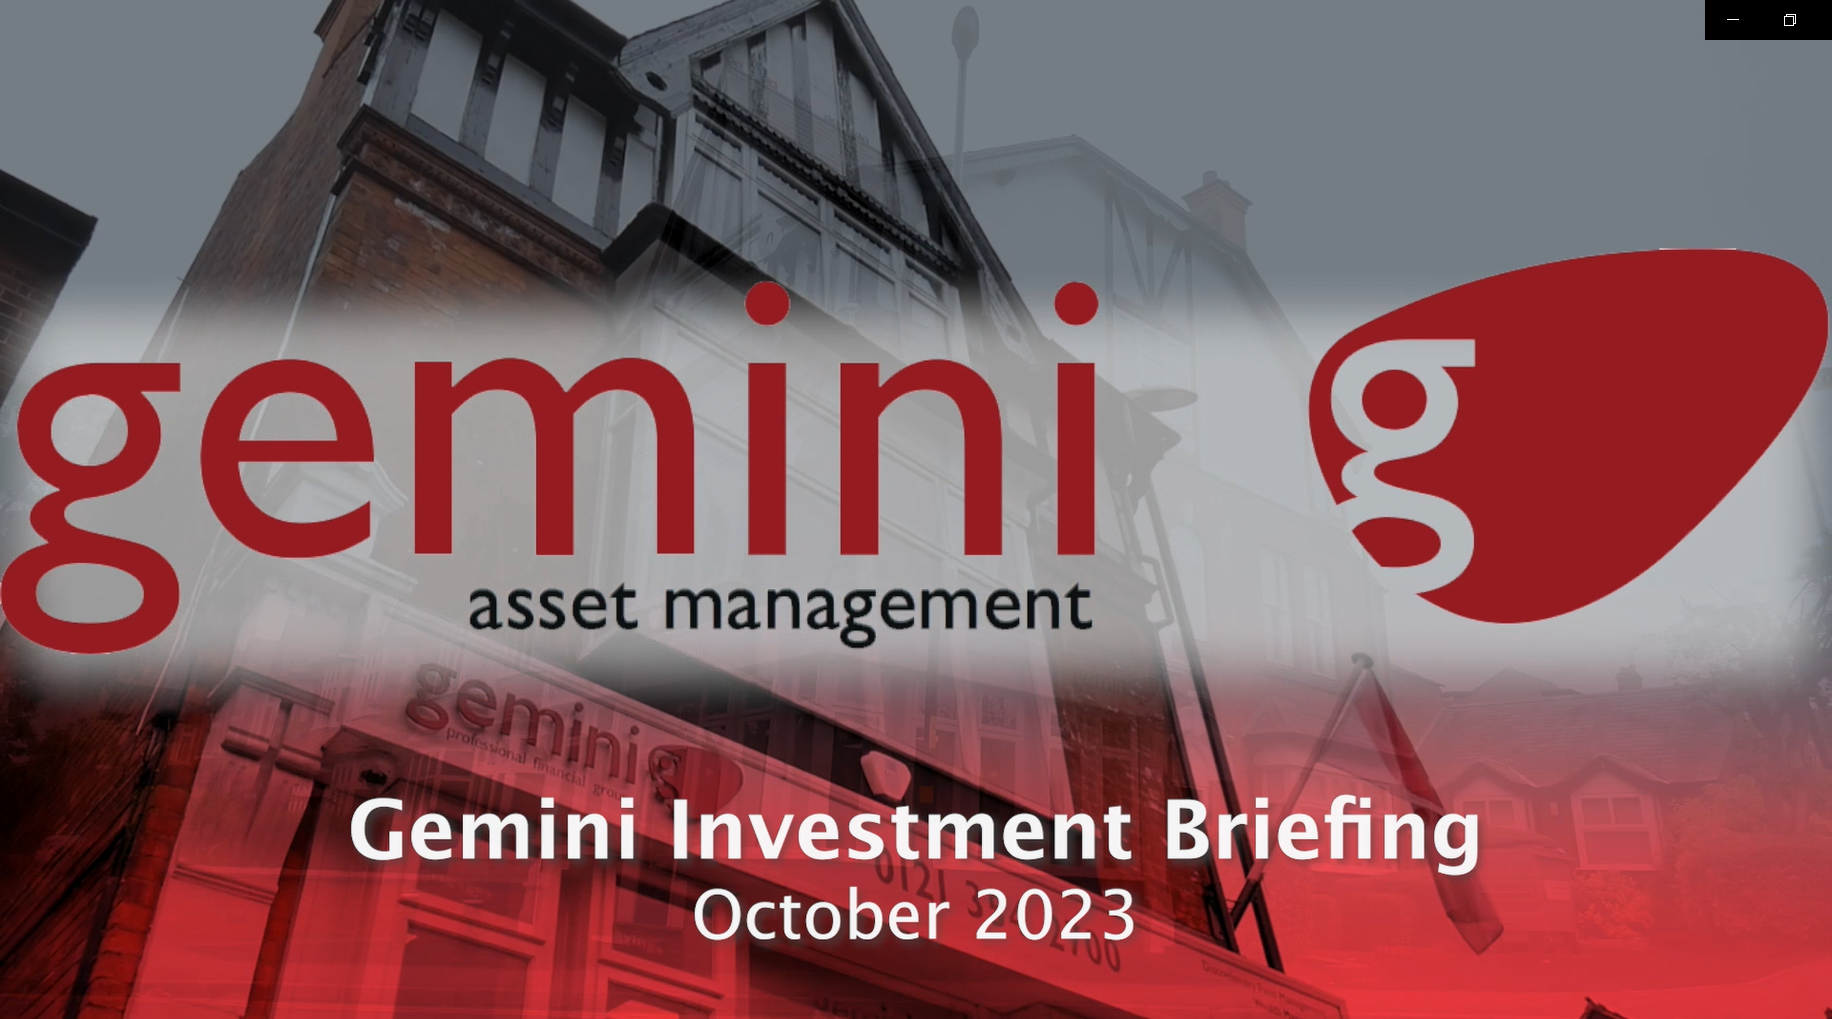 Investment Briefing October 2023